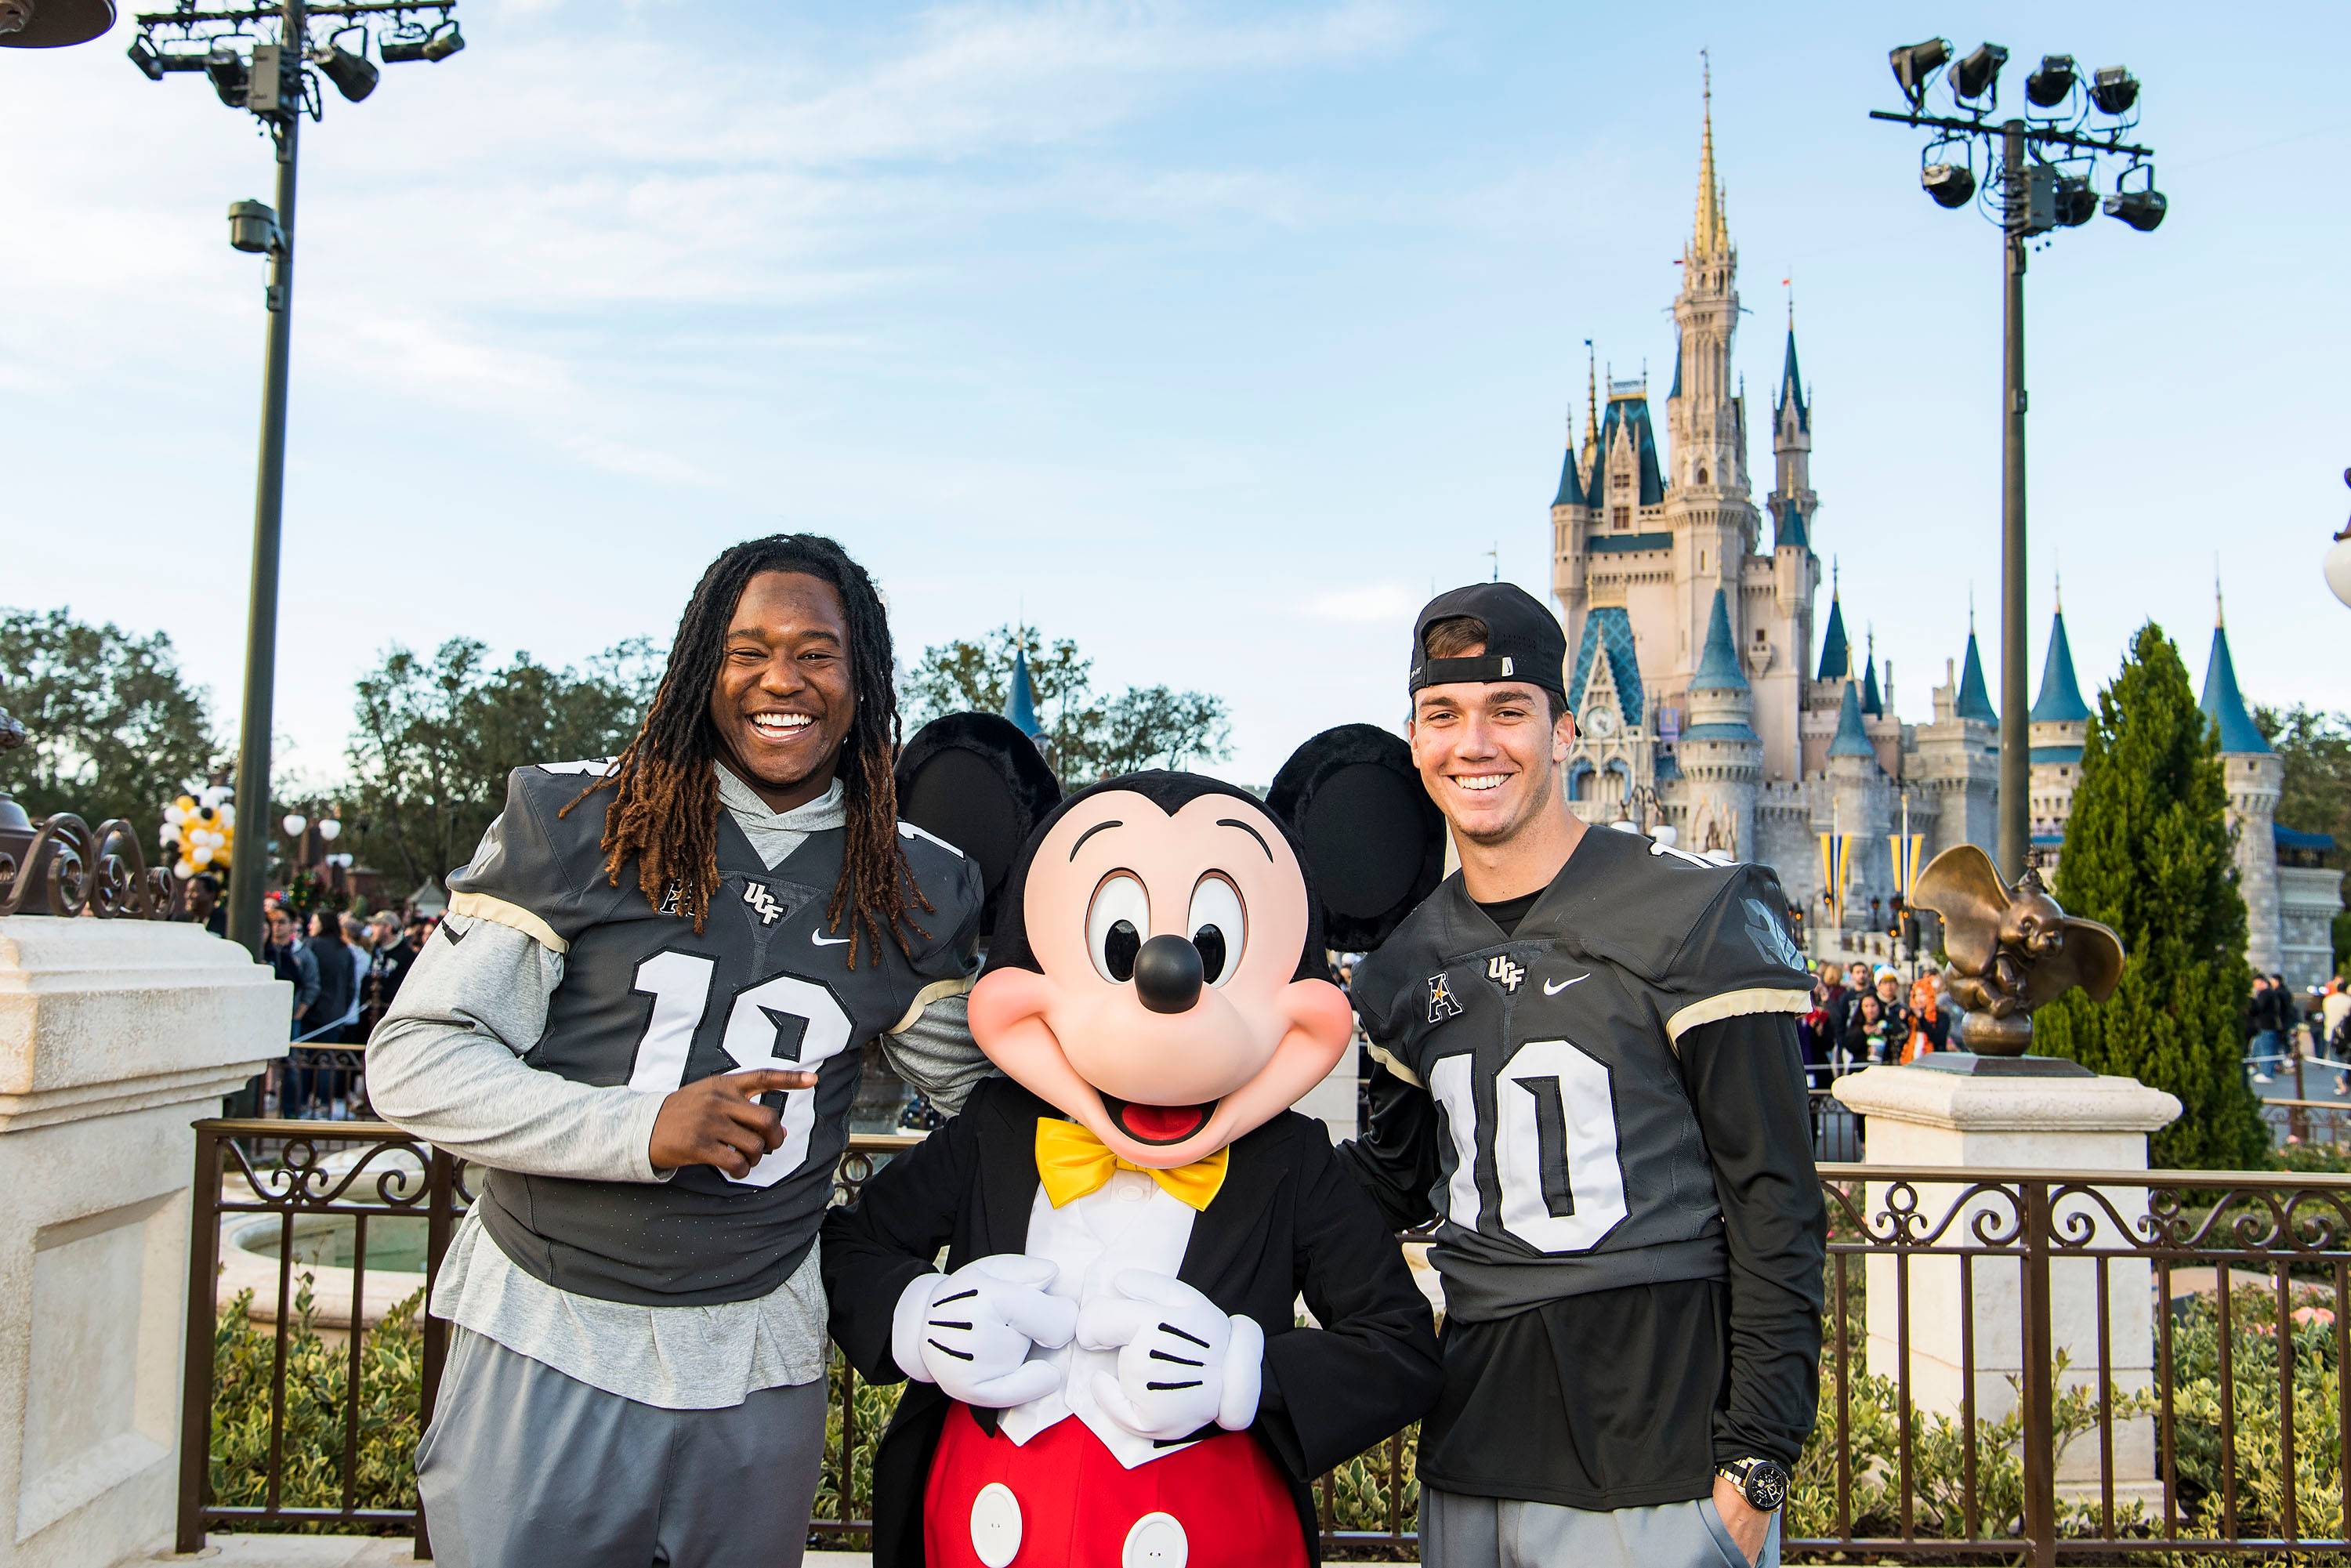 The University of Central Florida Knights linebacker Shaquem Griffin and quarterback McKenzie Milton pose with Mickey Mouse